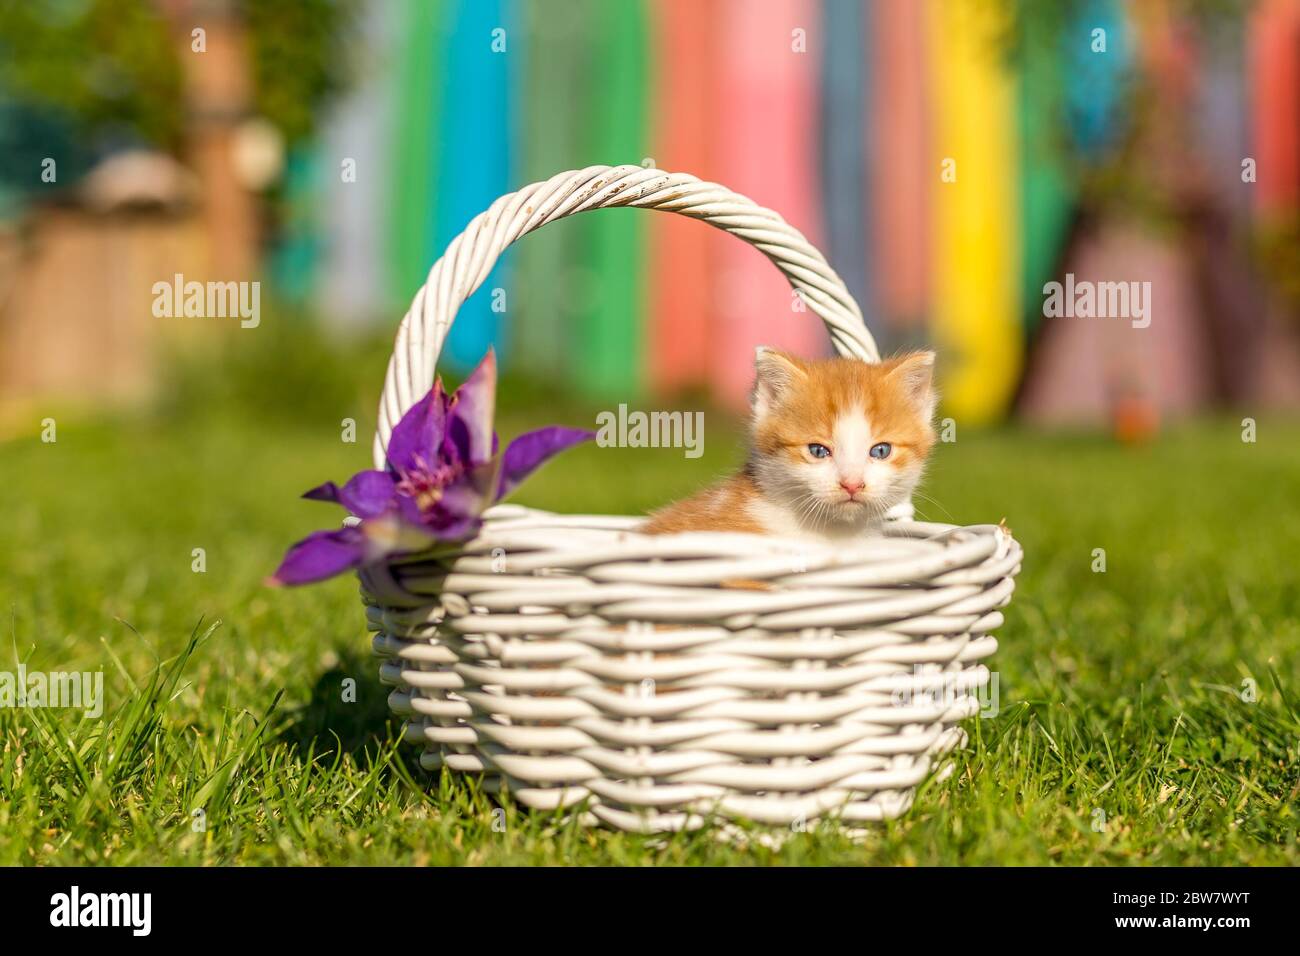 Ginger little kitten portrait in a beautiful white basket made from twigs on green grass in a colorful backyard. Funny domestic animals. Stock Photo